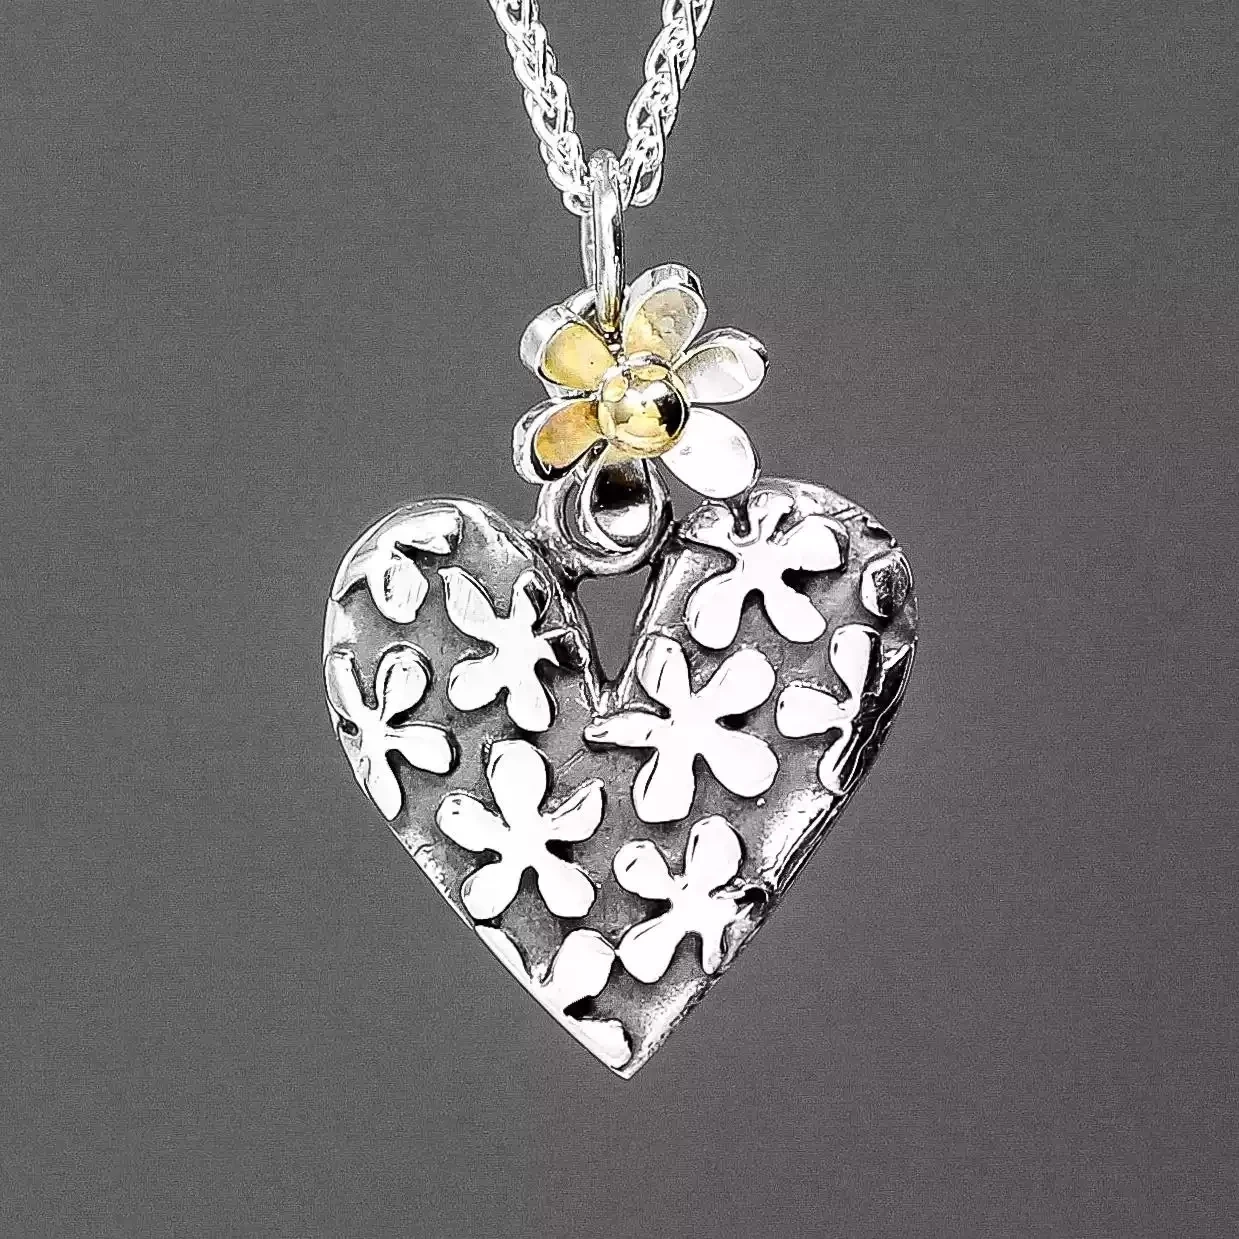 Hearts and Flowers Silver and Gold Necklace by Linda Macdonald